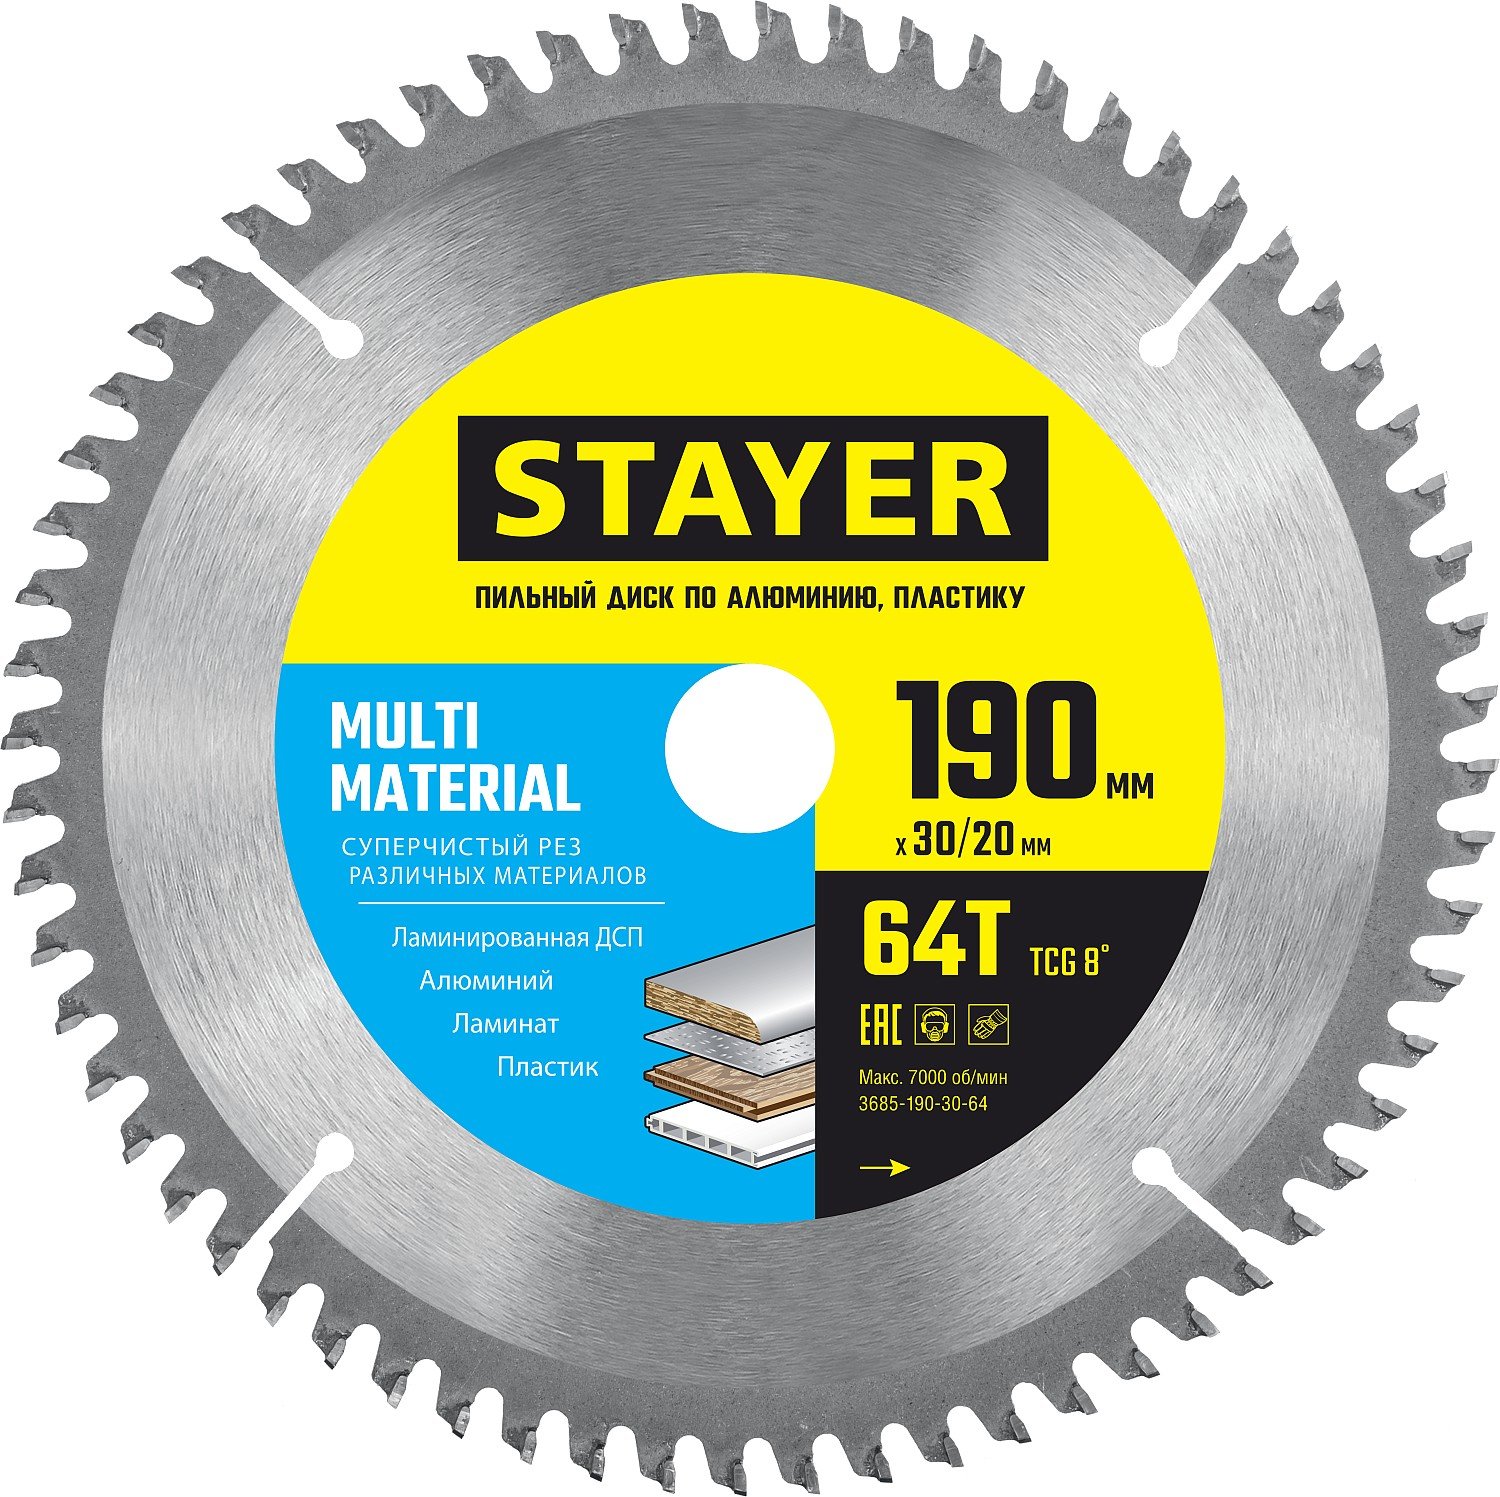 STAYER MULTI MATERIAL 19030 20 64,    ,    (3685-190-30-64)